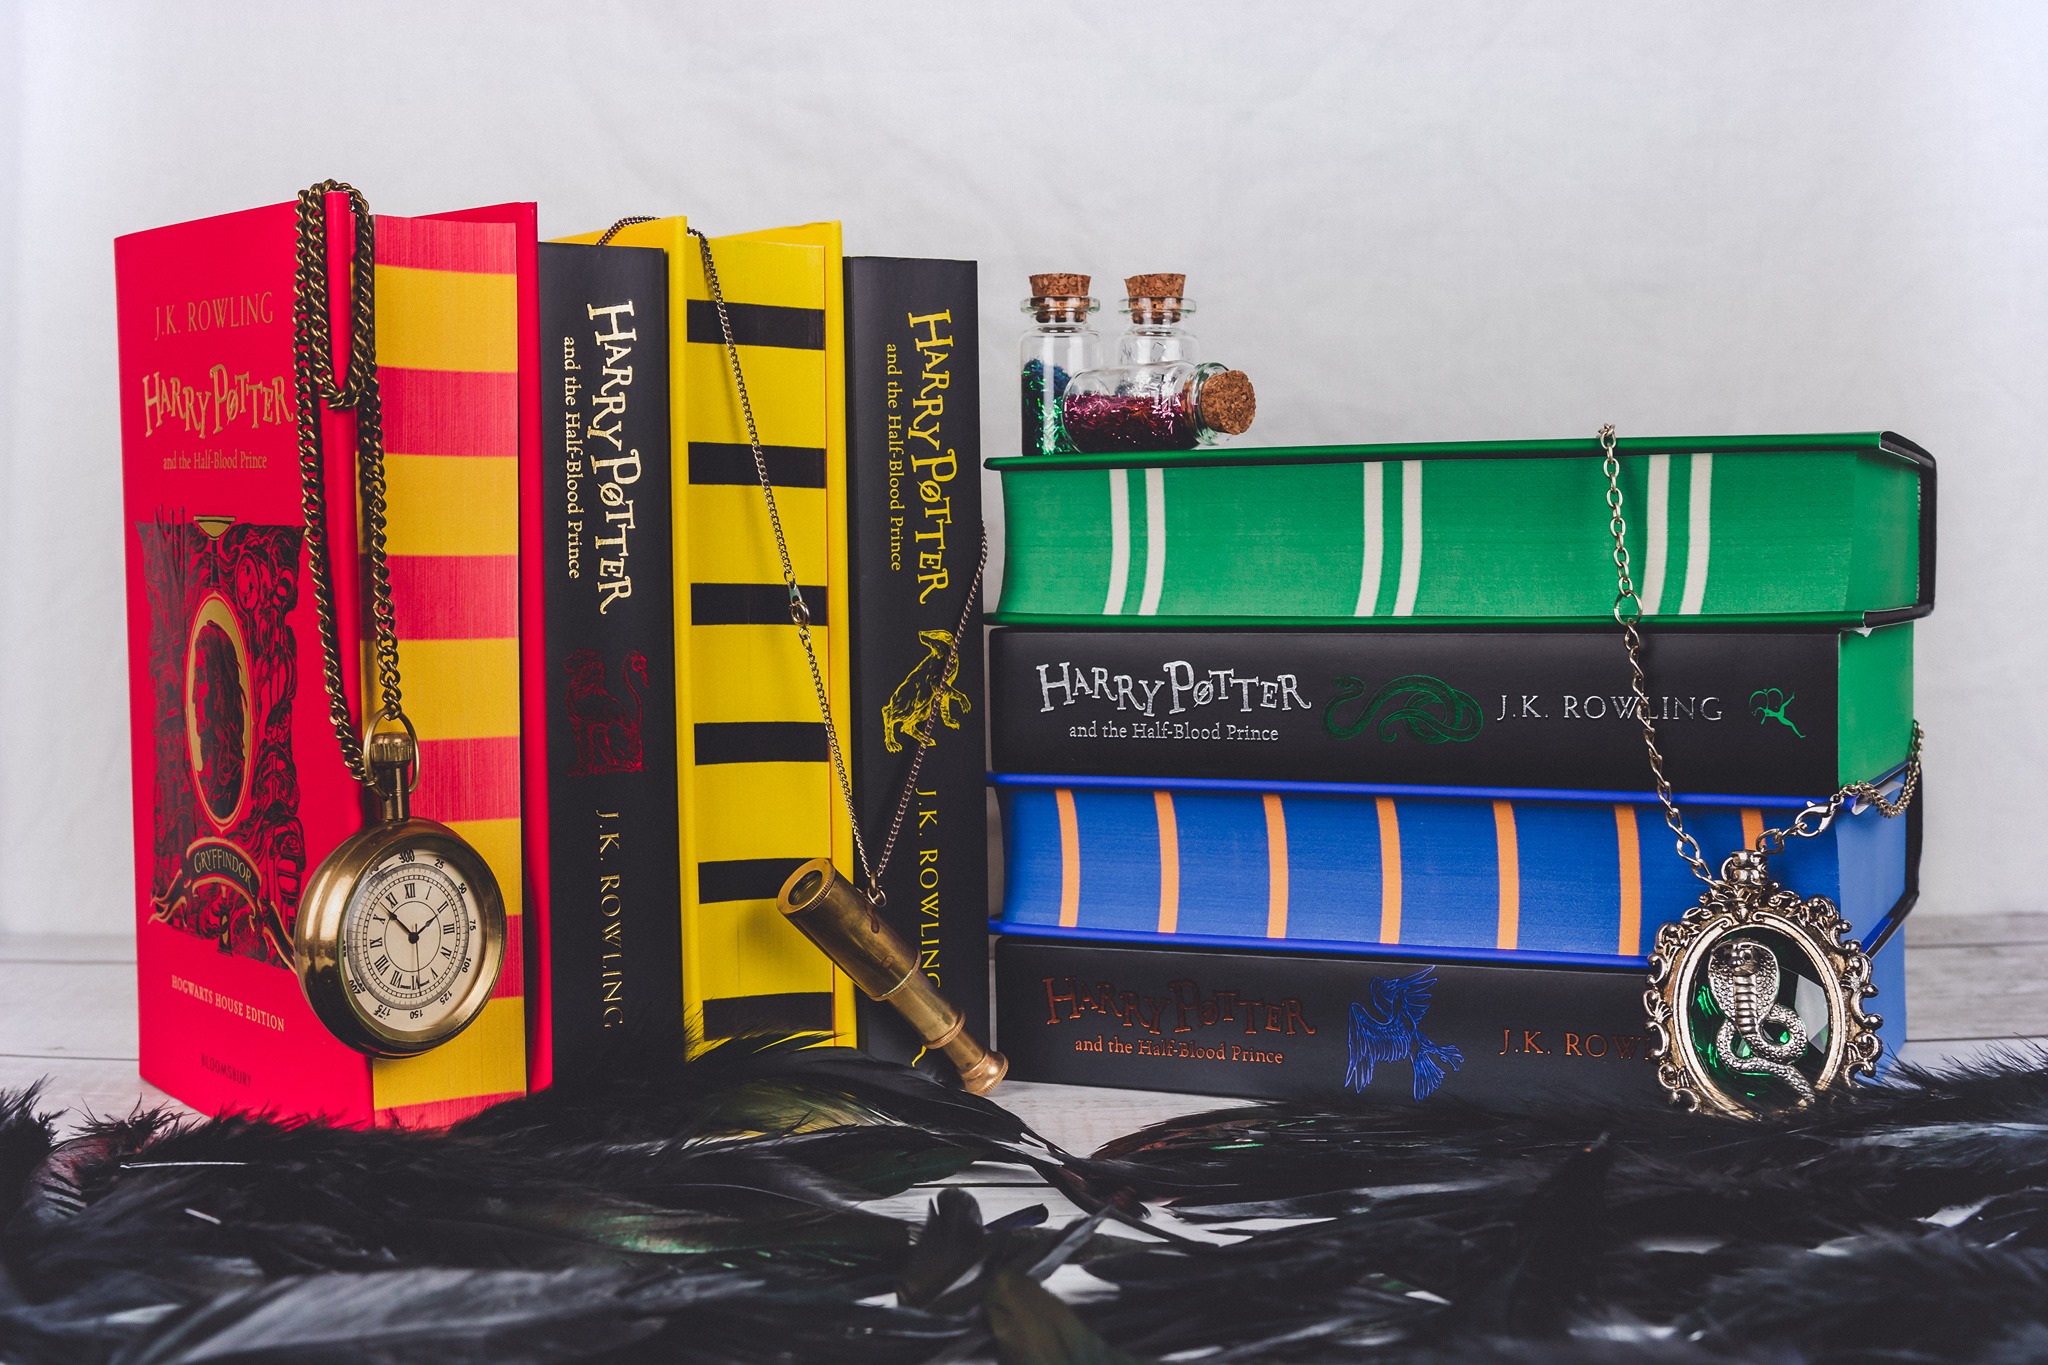 The Harry Potter books re-released in House Colours by Bloomsbury to commemorate their 20th Anniversary (Source: Bloomsbury)